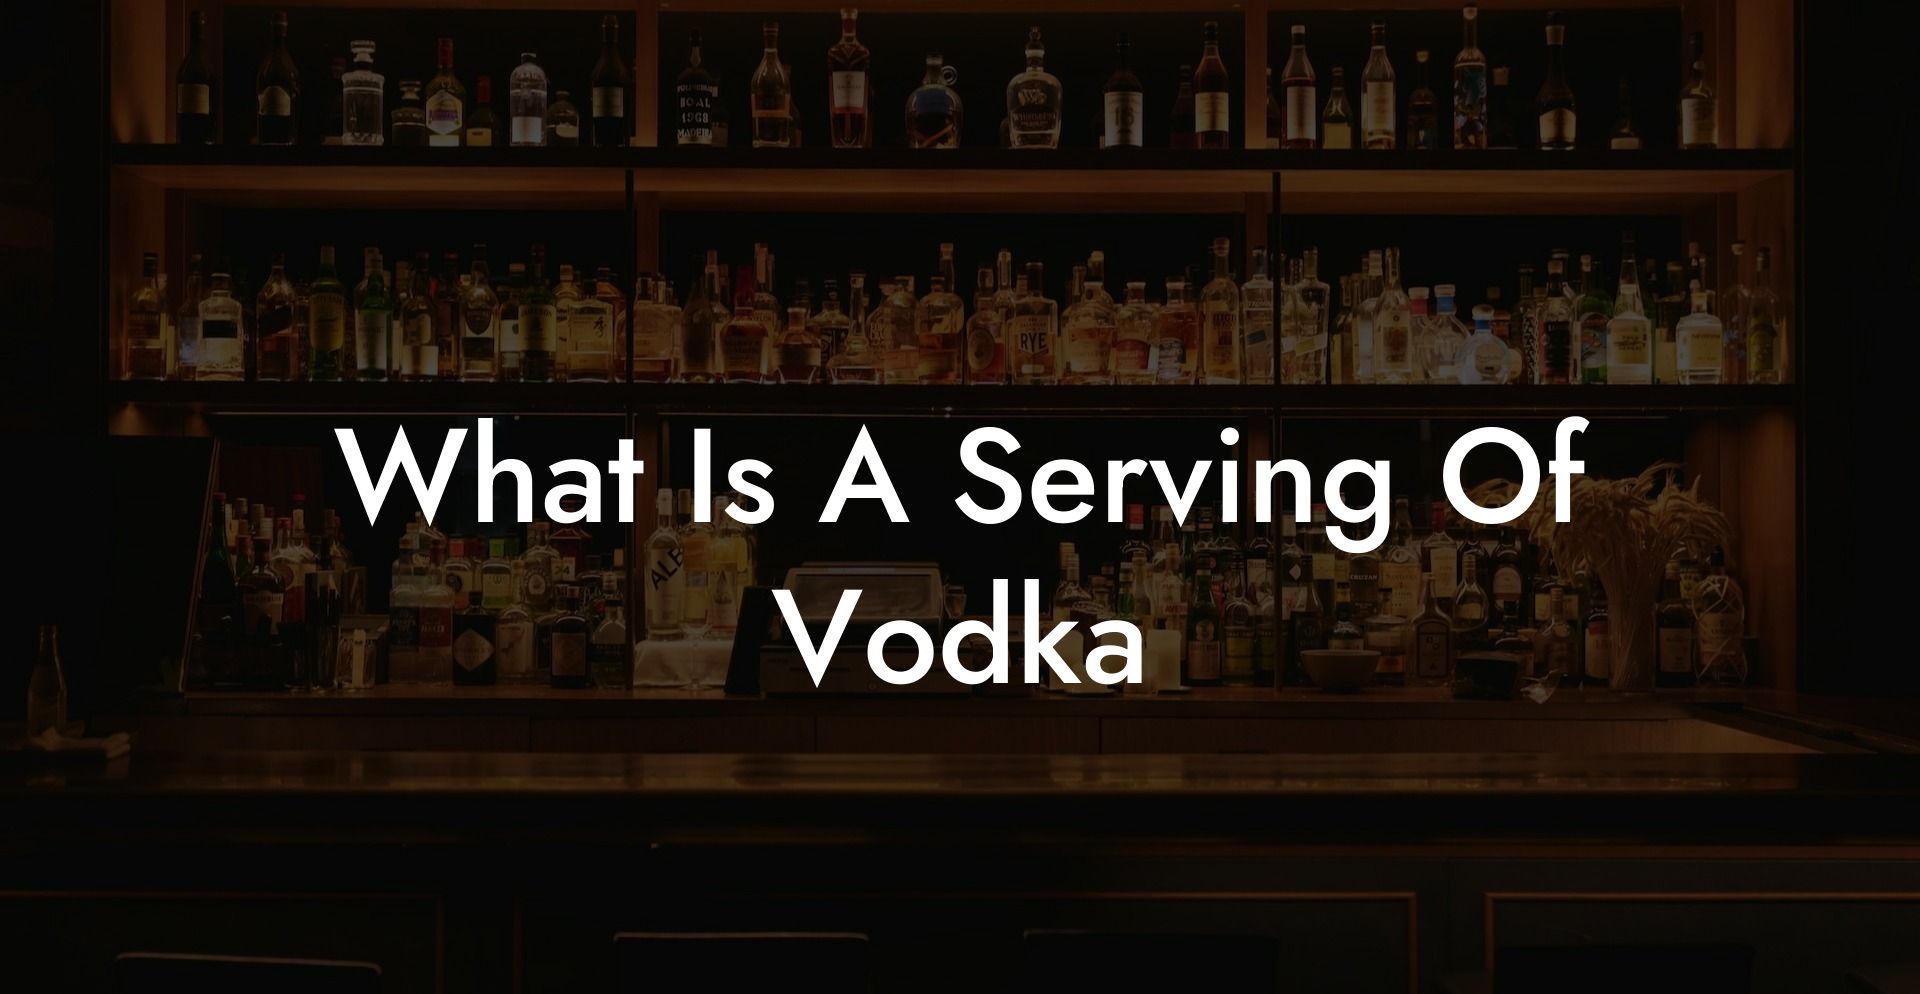 What Is A Serving Of Vodka